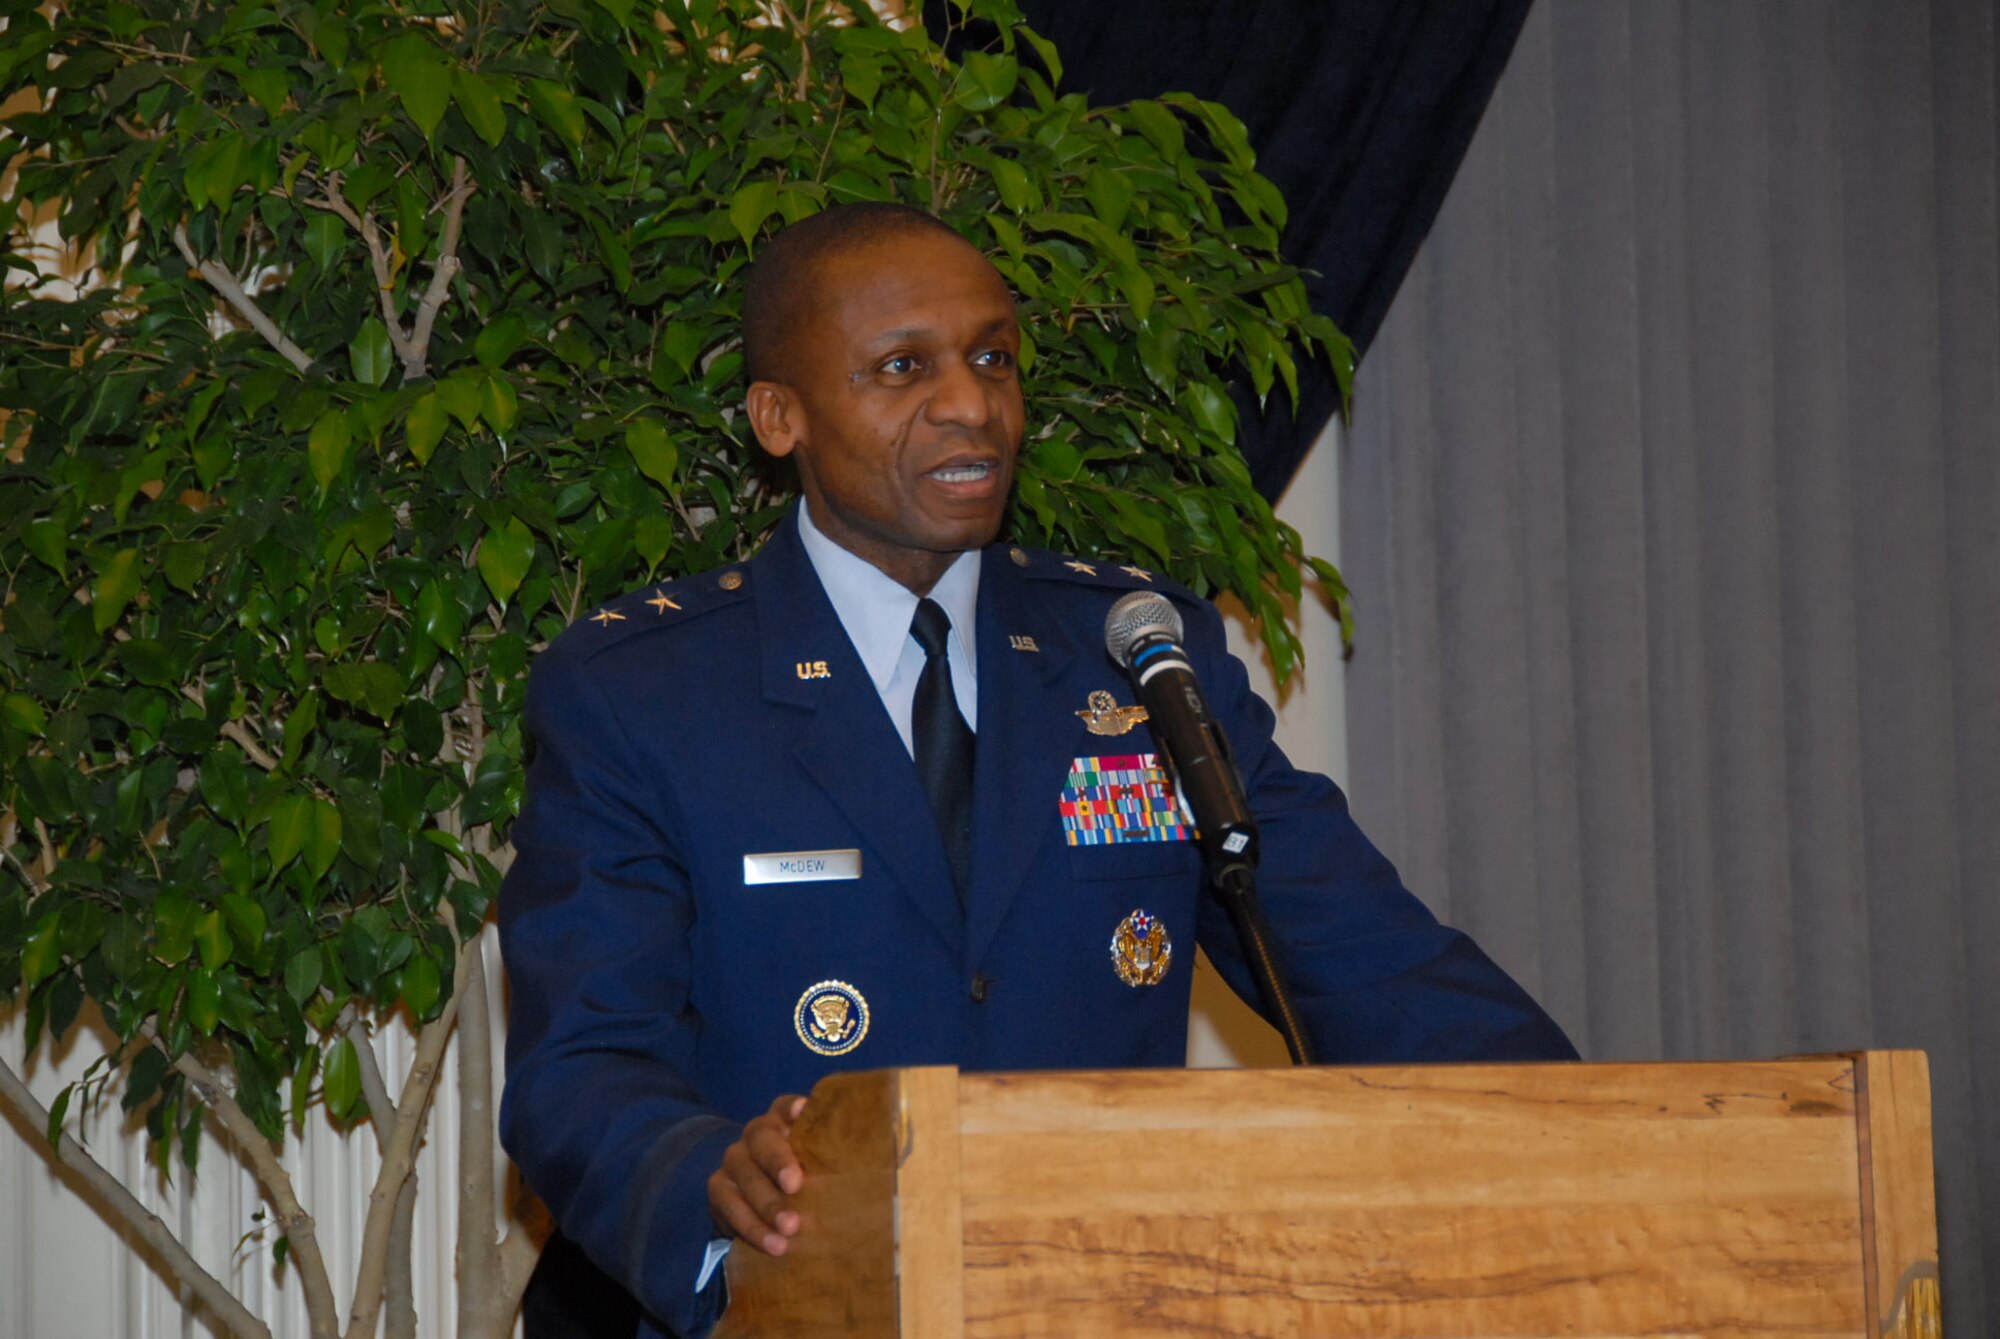 Maj. Gen. Darren W. McDew, director of public affairs for the Secretary of the Air Force, speaks to the audience at the Maxwell Officers’ Club on Feb. 4. As part of the African-American History Month celebration, General McDew related the historic struggles of African-Americans that were “validated by the 39 words” spoken by President Barack Obama while taking the oath of office. (Air Force photo by Jamie Pitcher)